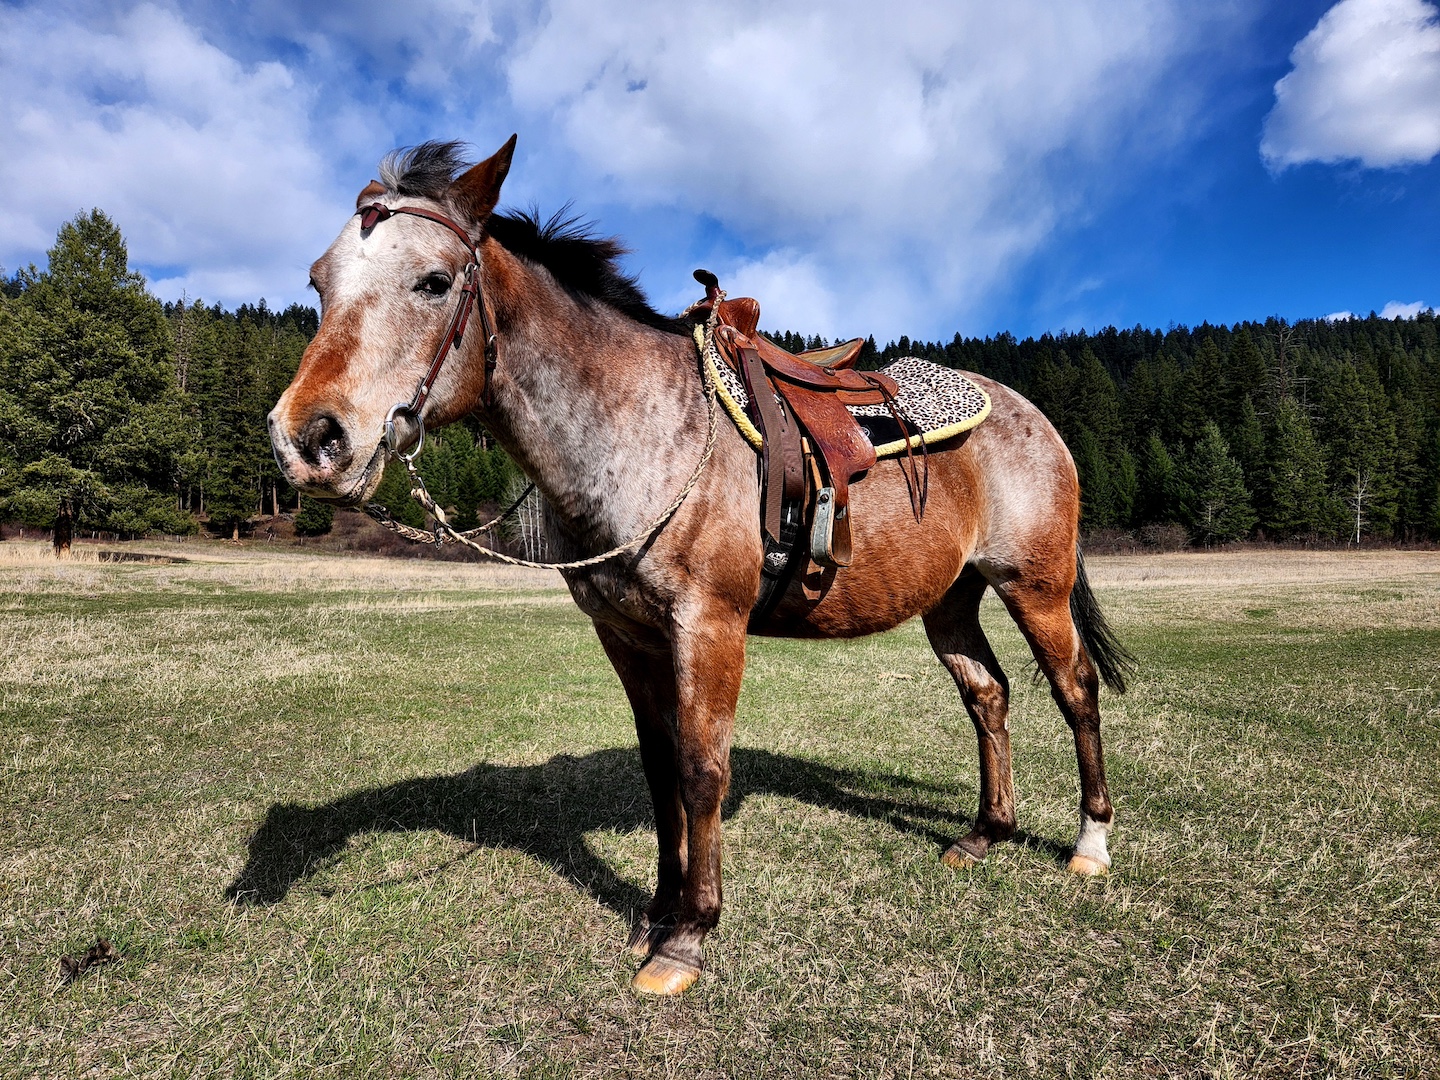 photo of an appaloosa horse in western gear, in a sunny field, looking judgmental and unimpressed with life